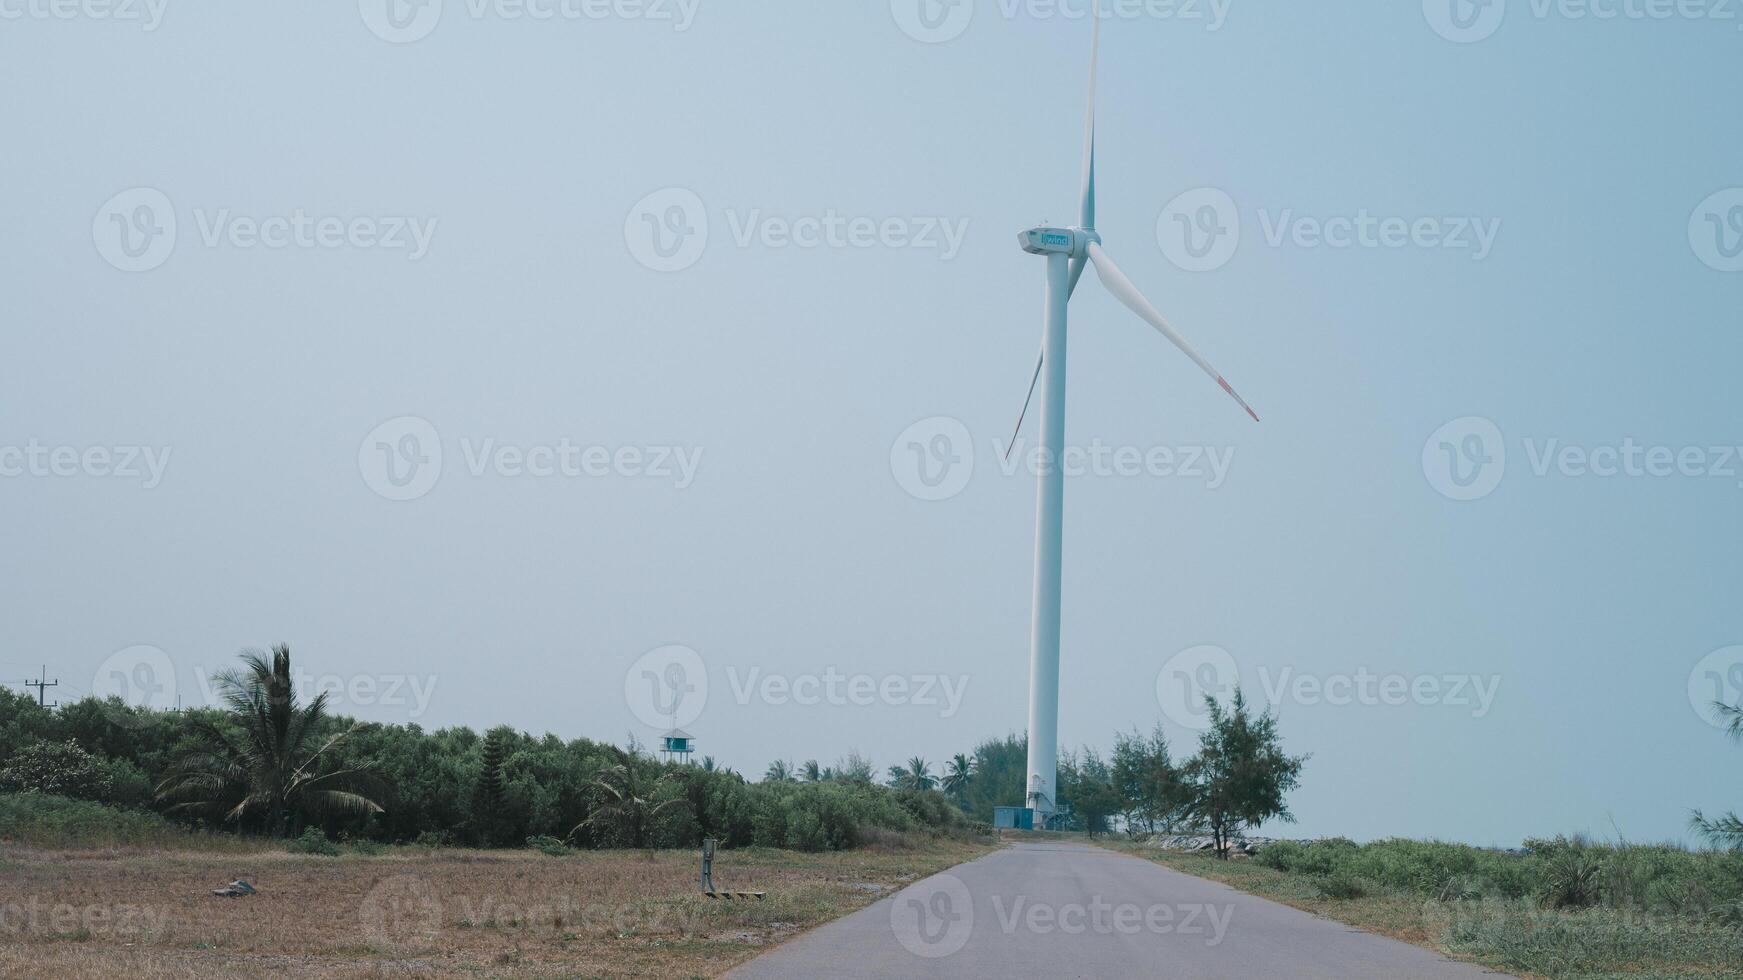 Windmill's turbine gracefully harnesses wind's power, converting it into electricity through generator. Sustainable technology exemplifies promise of renewable energy for greener, ecological future photo